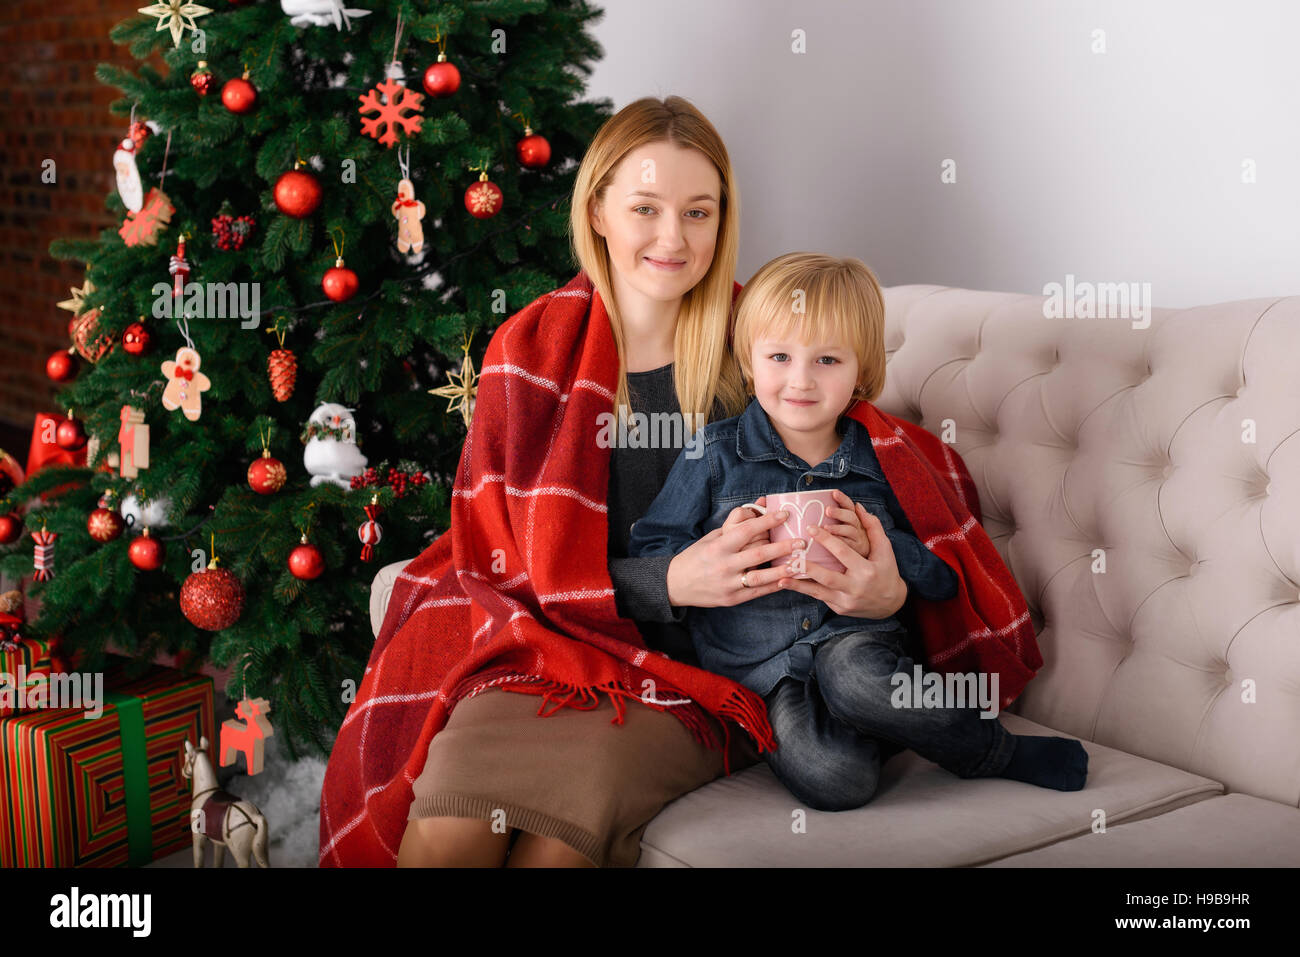 Mother and son sitting near a rug covered trees Stock Photo